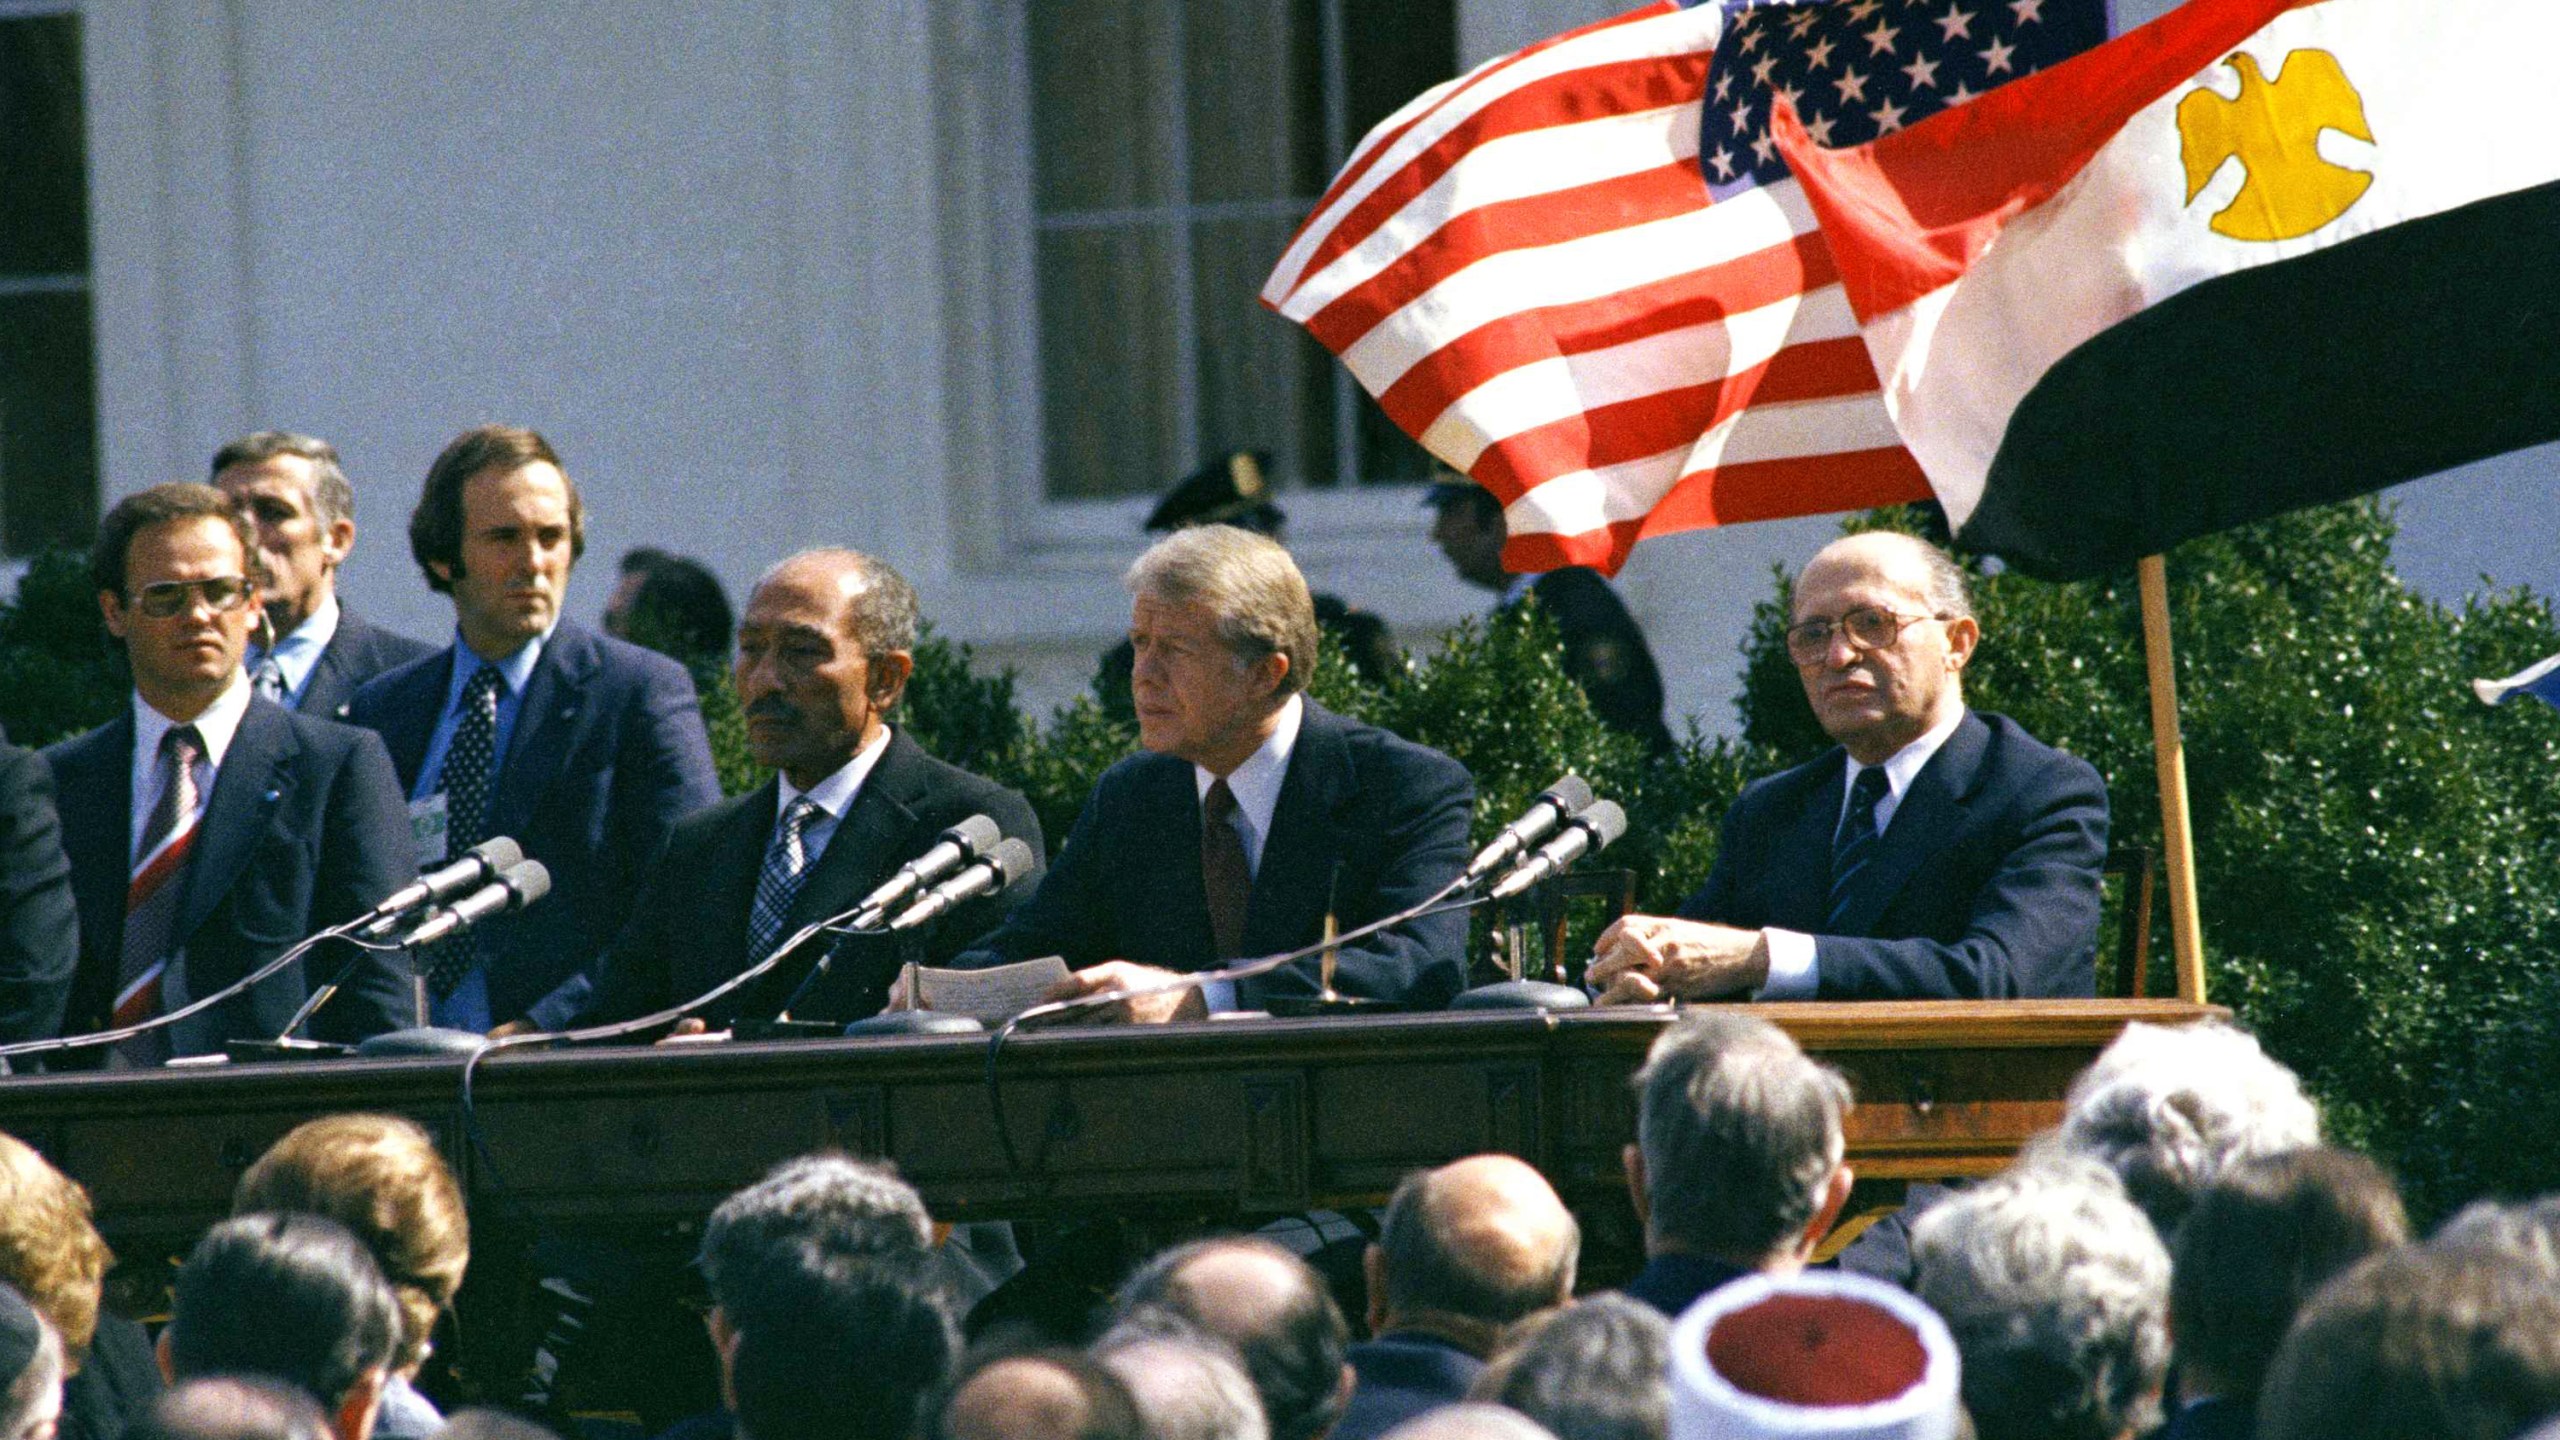 CORRECTS DATE FILE - U.S. President Jimmy Carter, Egyptian President Anwar Sadat and Israeli President Menachem Begin attend the formal ceremony for the Camp David Accords in Washington, D.C., March 26, 1979, designed to bring peace to the Middle East. Egypt has threatened to void its decades-long peace treaty with Israel if Israel begins a large-scale offensive on Rafah, where some 1.4 million Palestinians shelter in densely-packed tent camps on the border with Egypt. (AP Photo, File)